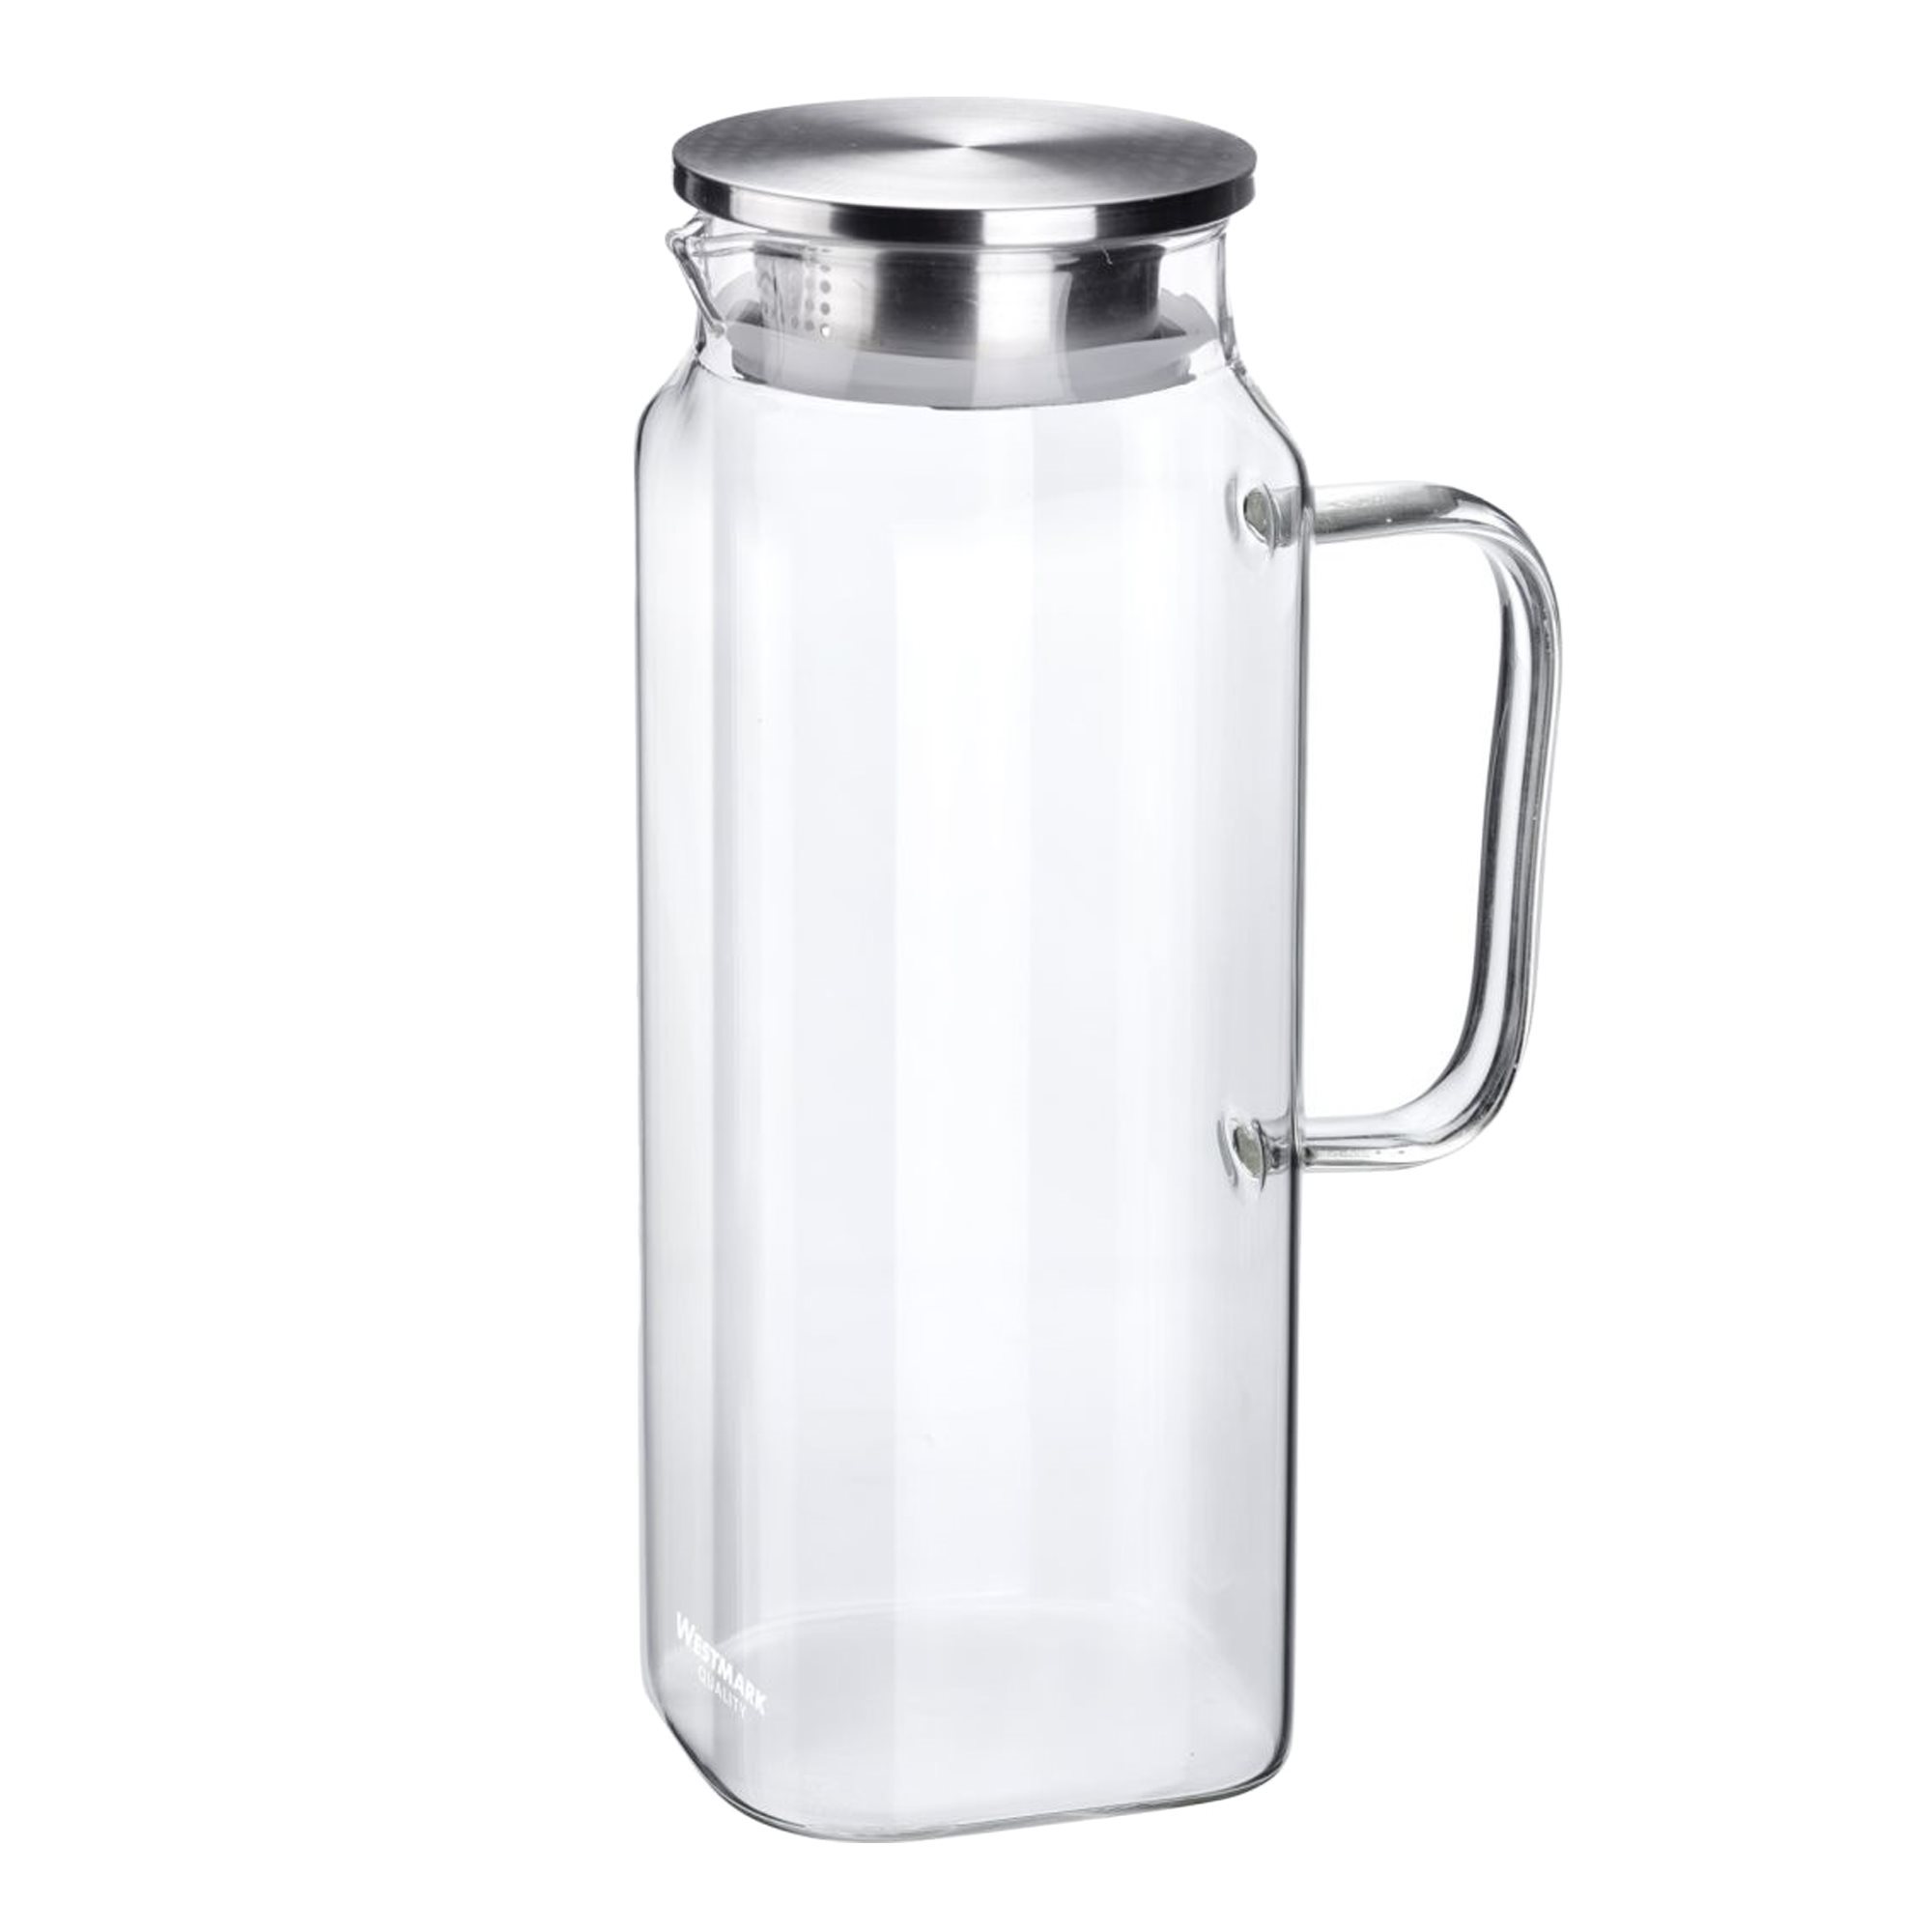  Glass Carafe with Lid, Glass Jug Water Carafe Made of